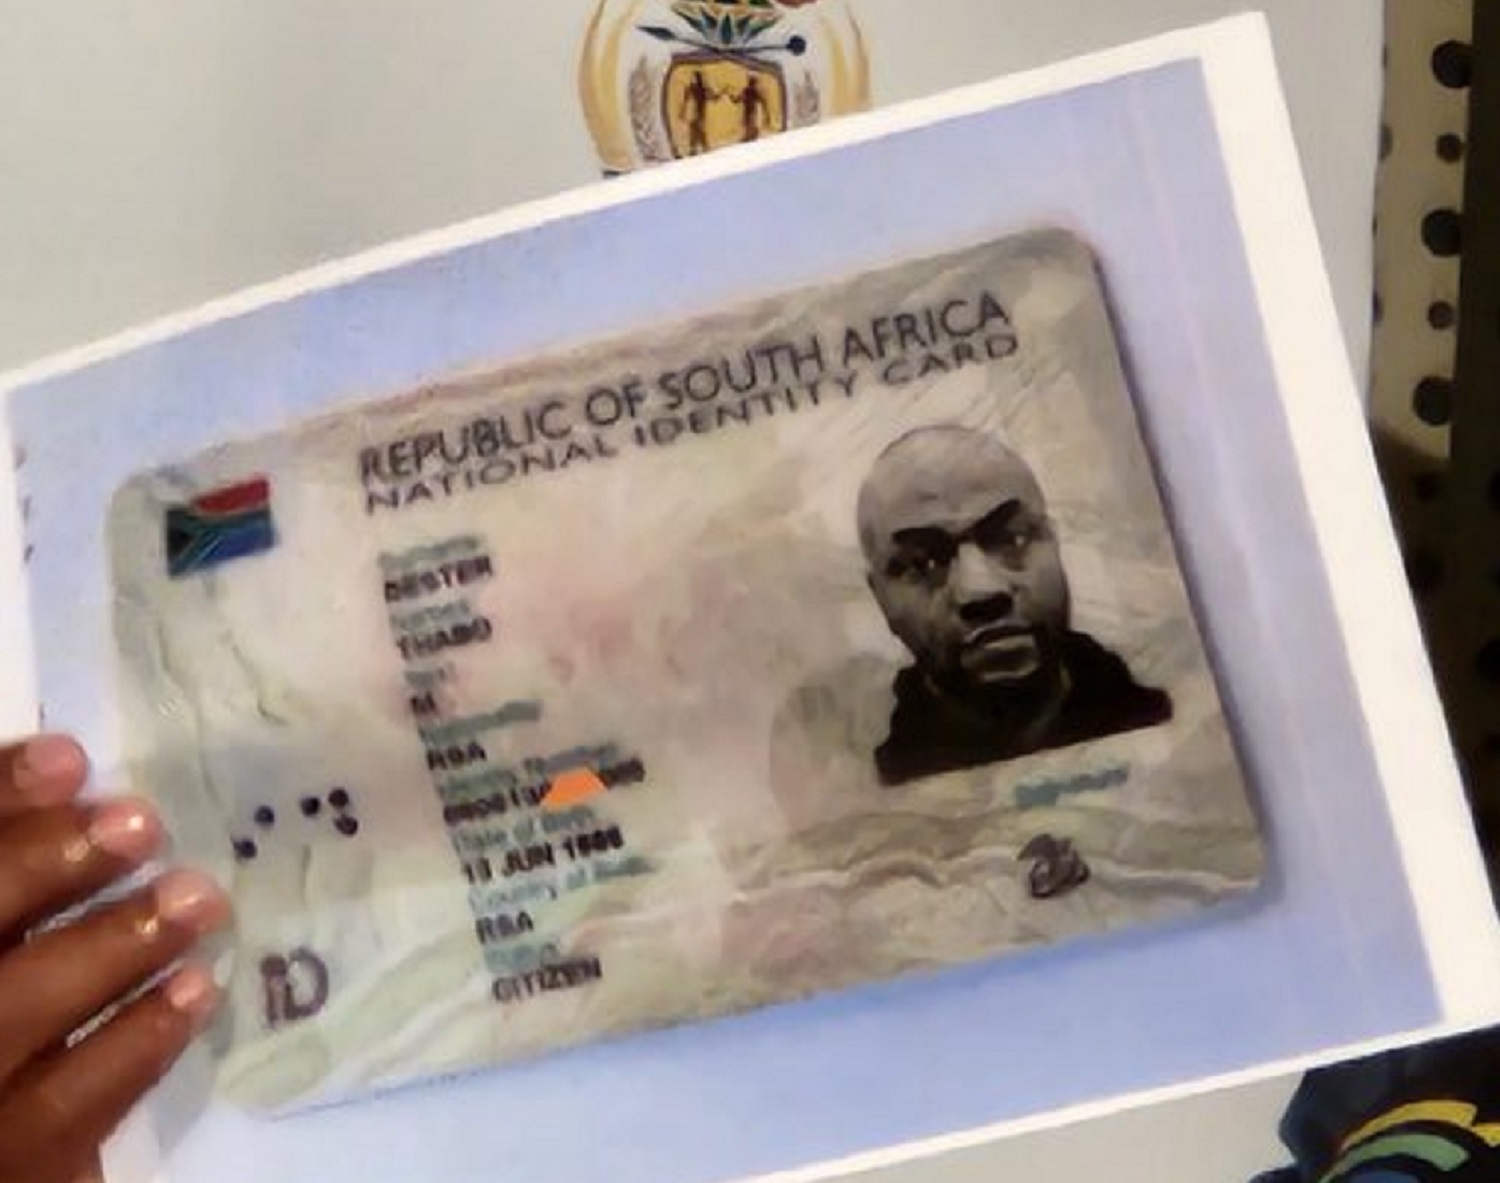 fake south african id number